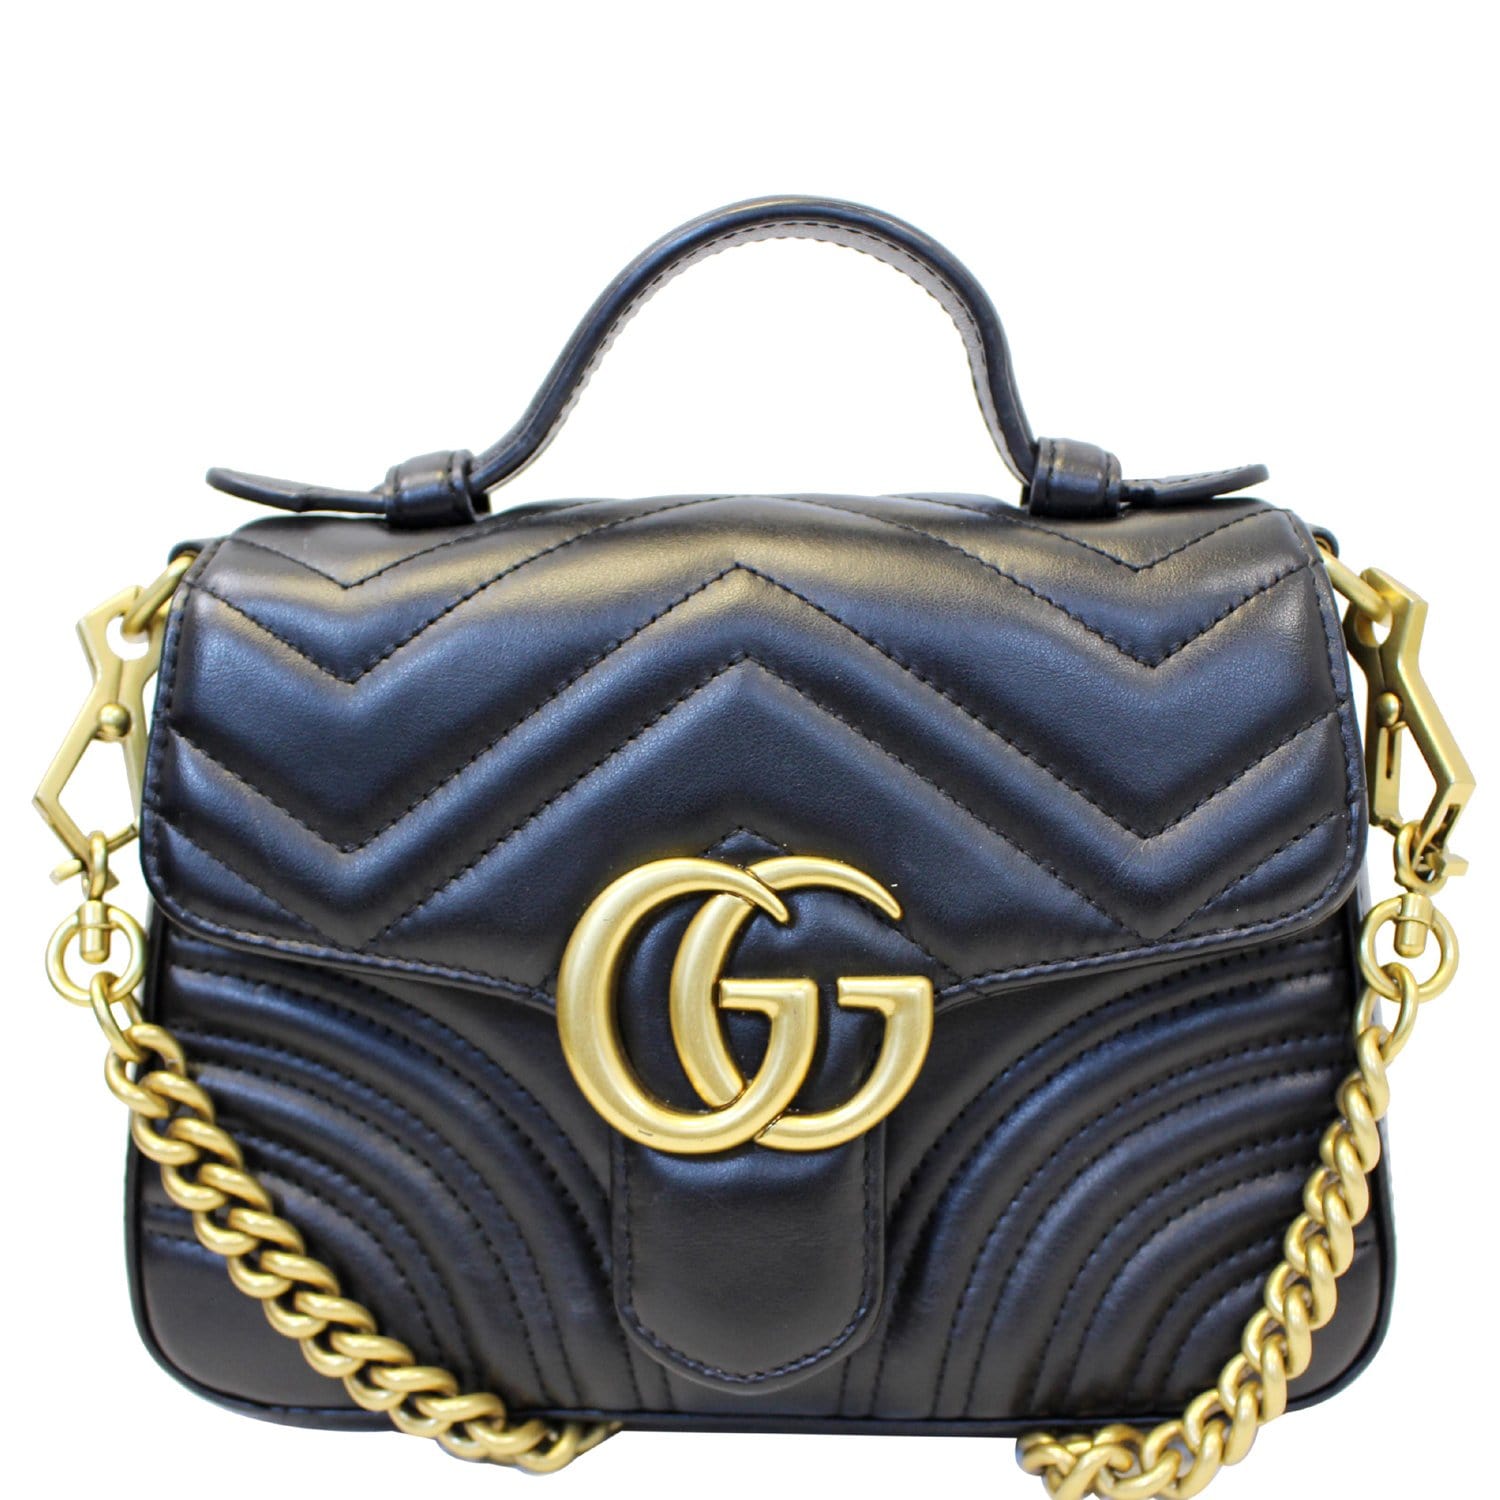 GG Marmont Small Size bag in black leather Gucci - Second Hand